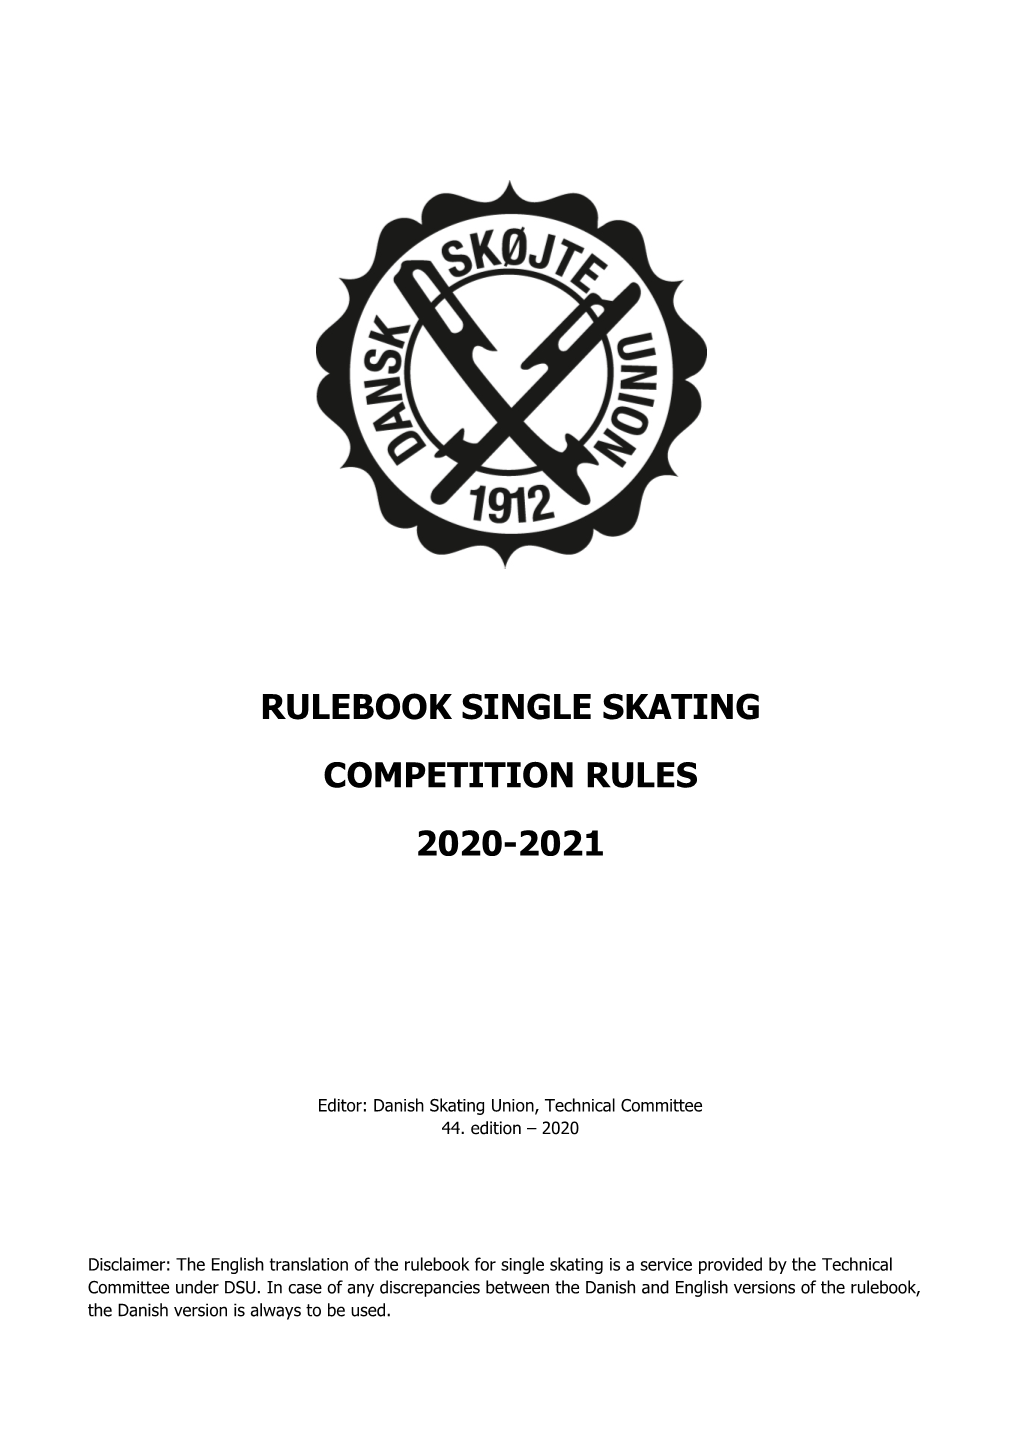 Rulebook Single Skating Competition Rules 2020-2021